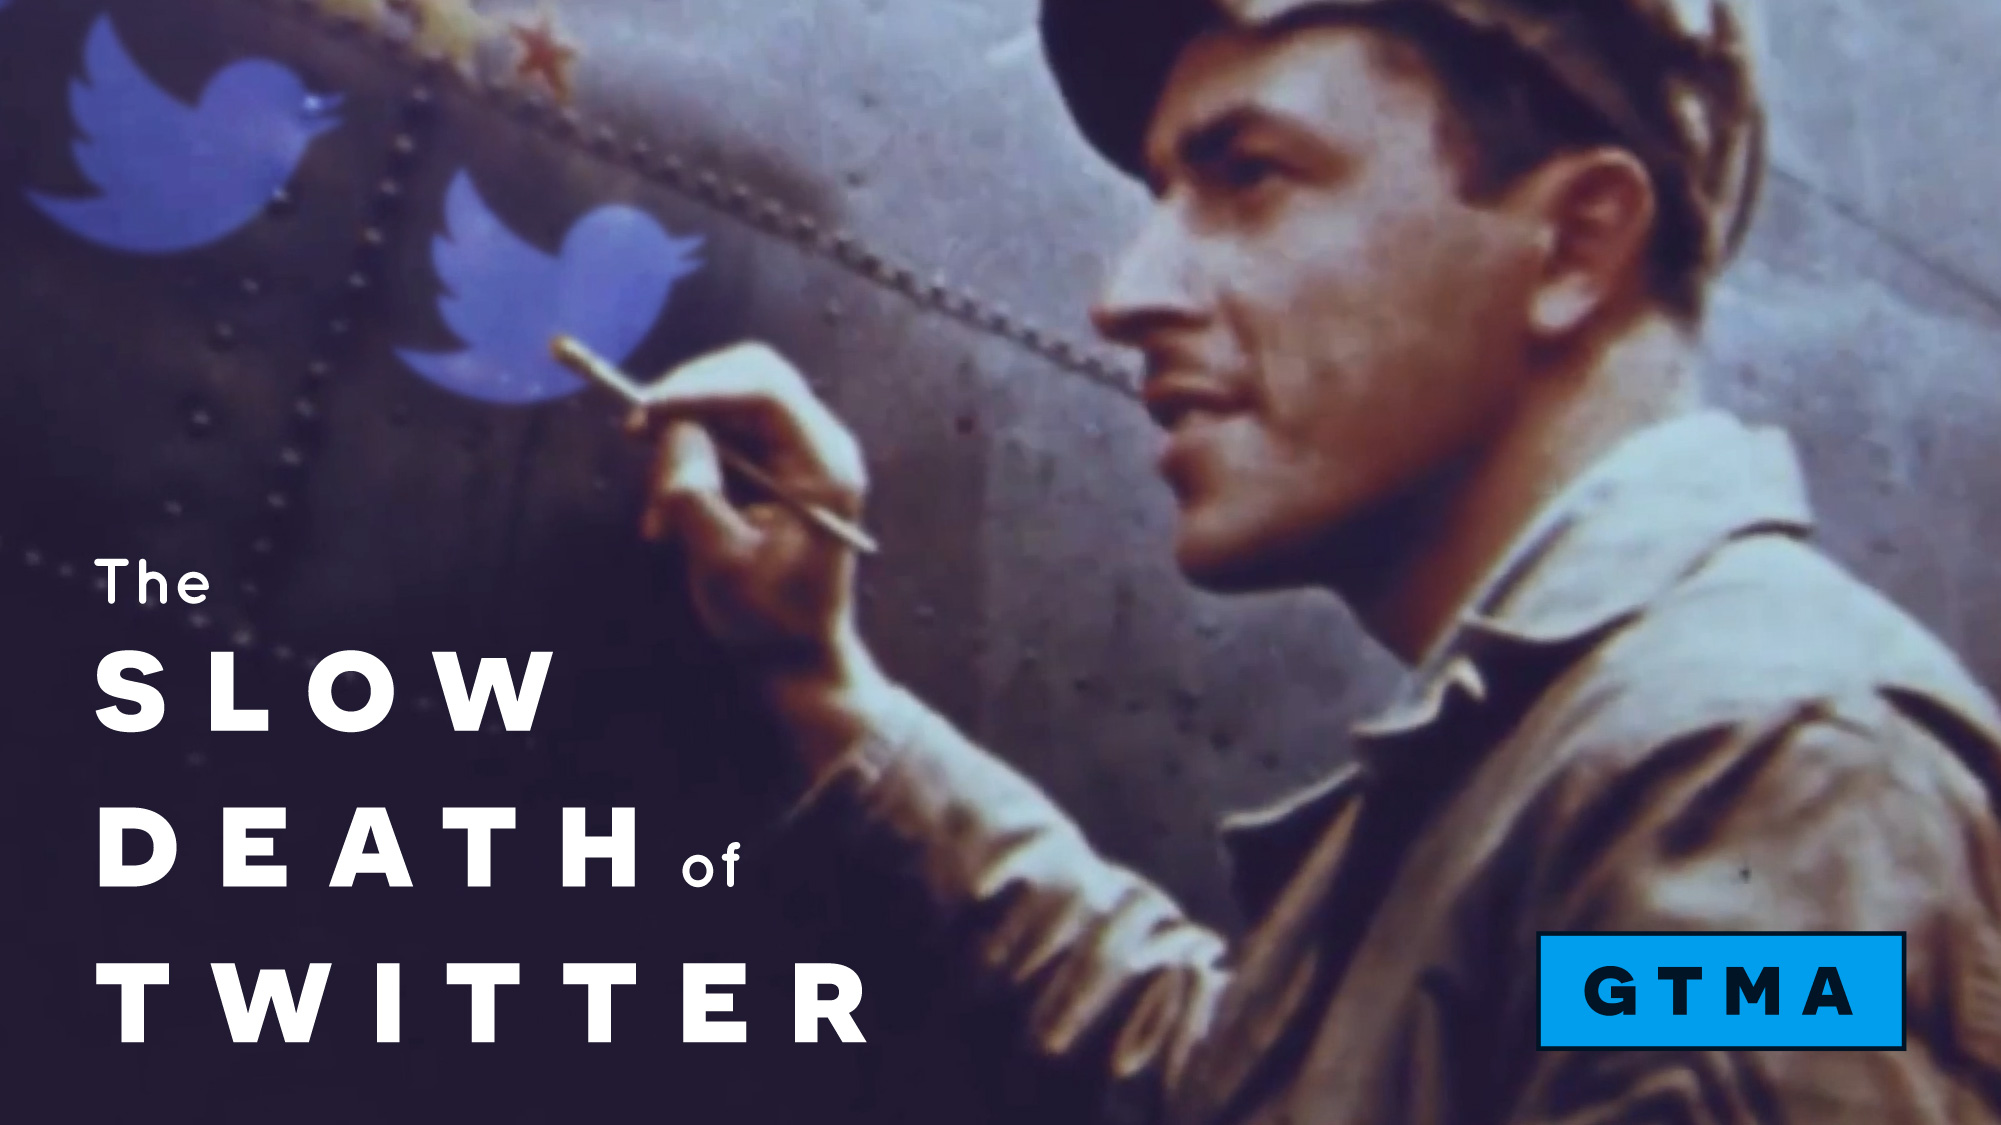 THE SLOW DEATH OF TWITTER